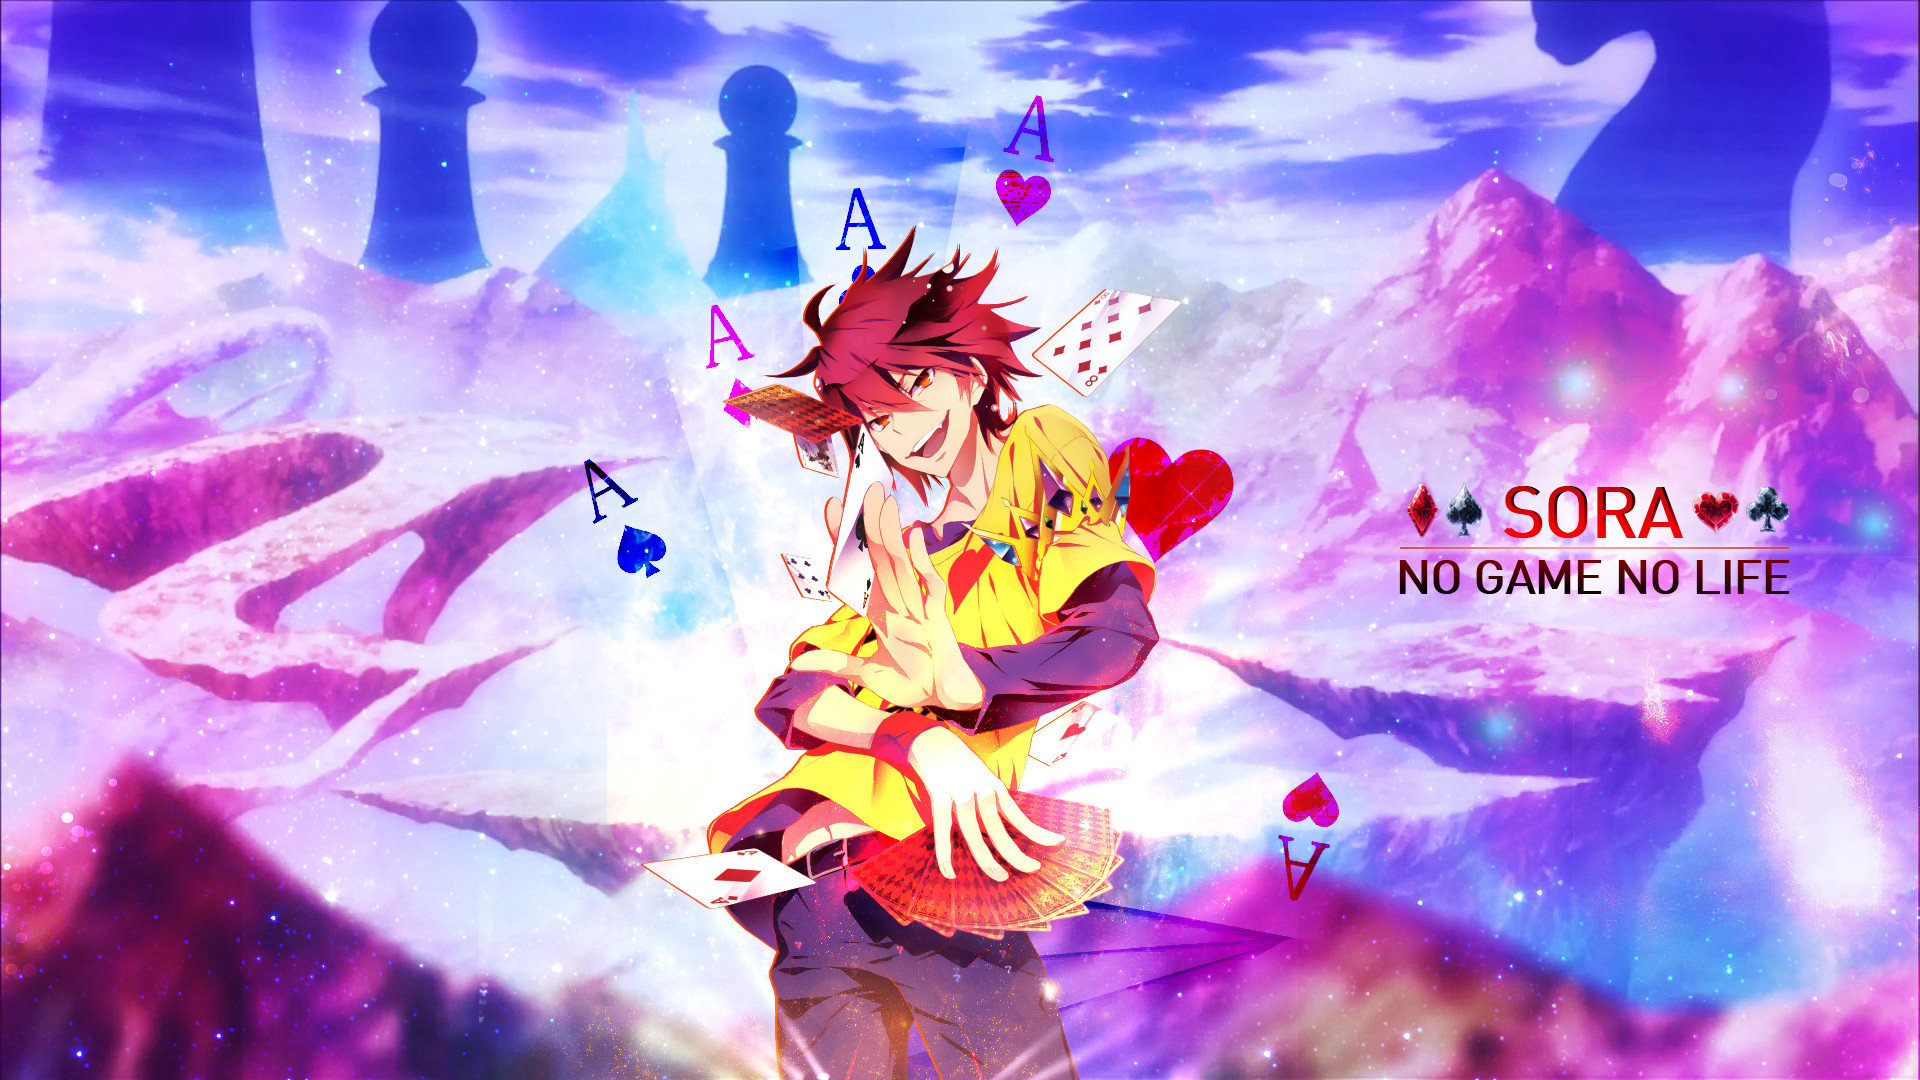 Download full hd 1080p Sora (No Game No Life) desktop background ID:102597 for free